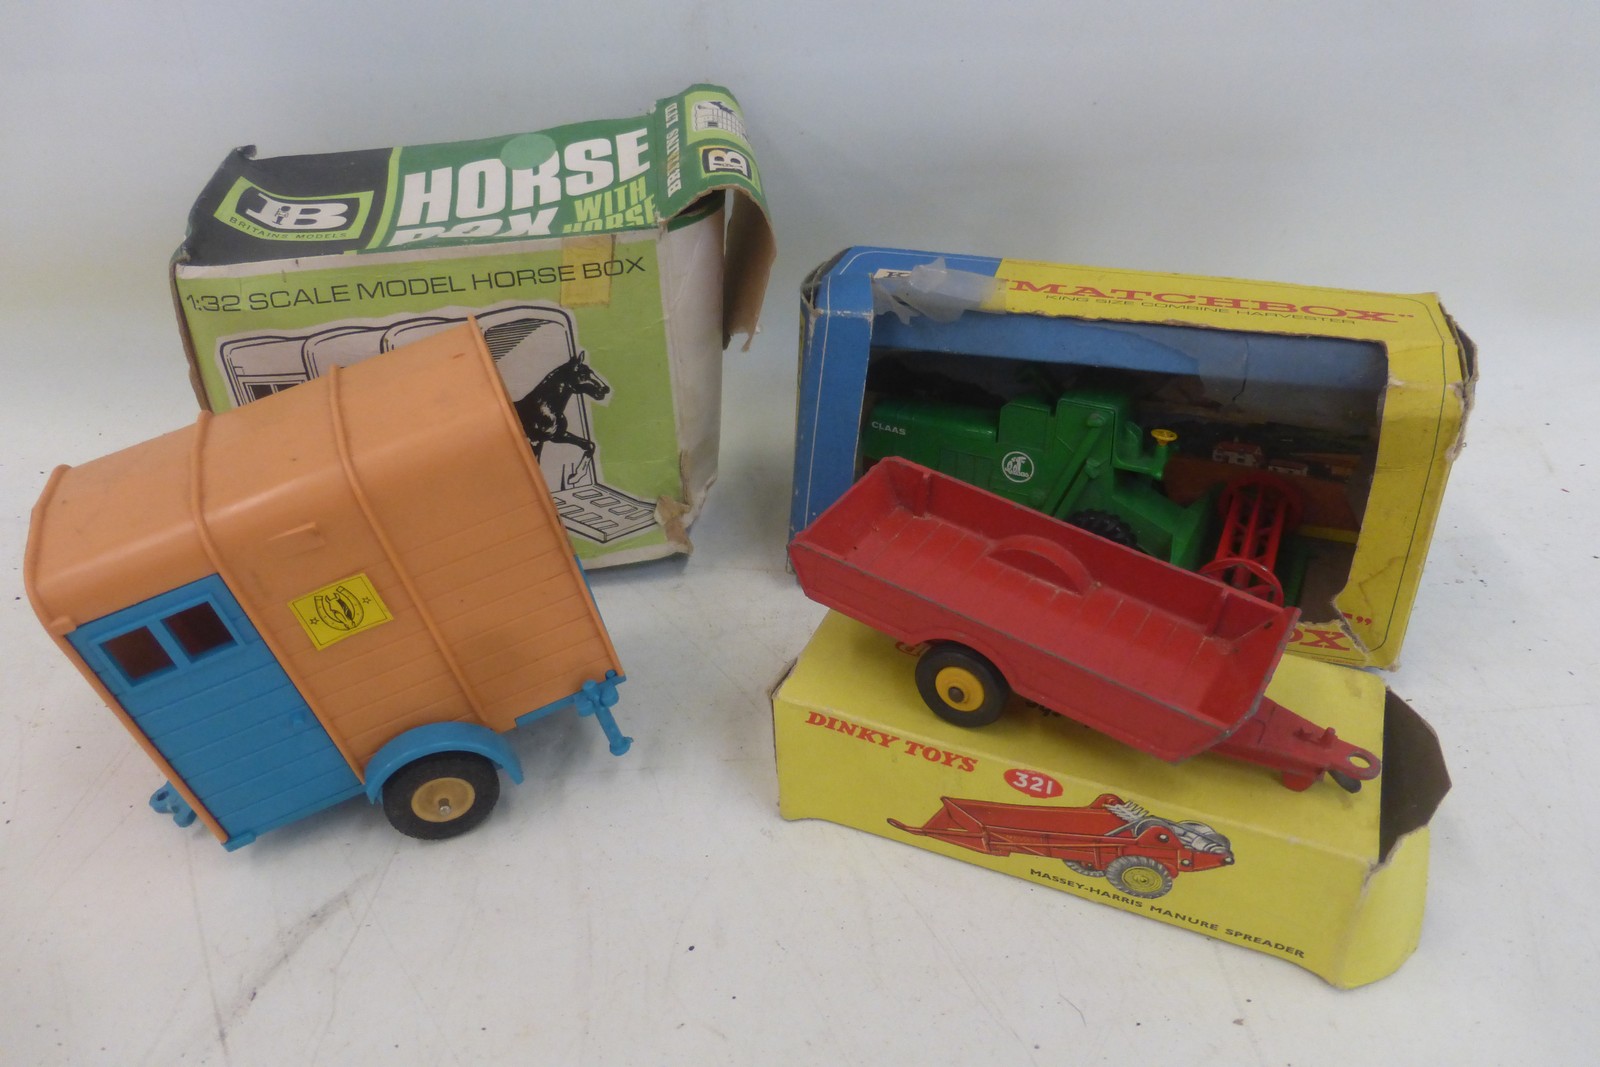 A boxed Matchbox King Size Combine Harvester, a boxed Britains Ltd. 1:32 scale Horse Box and a Dinky